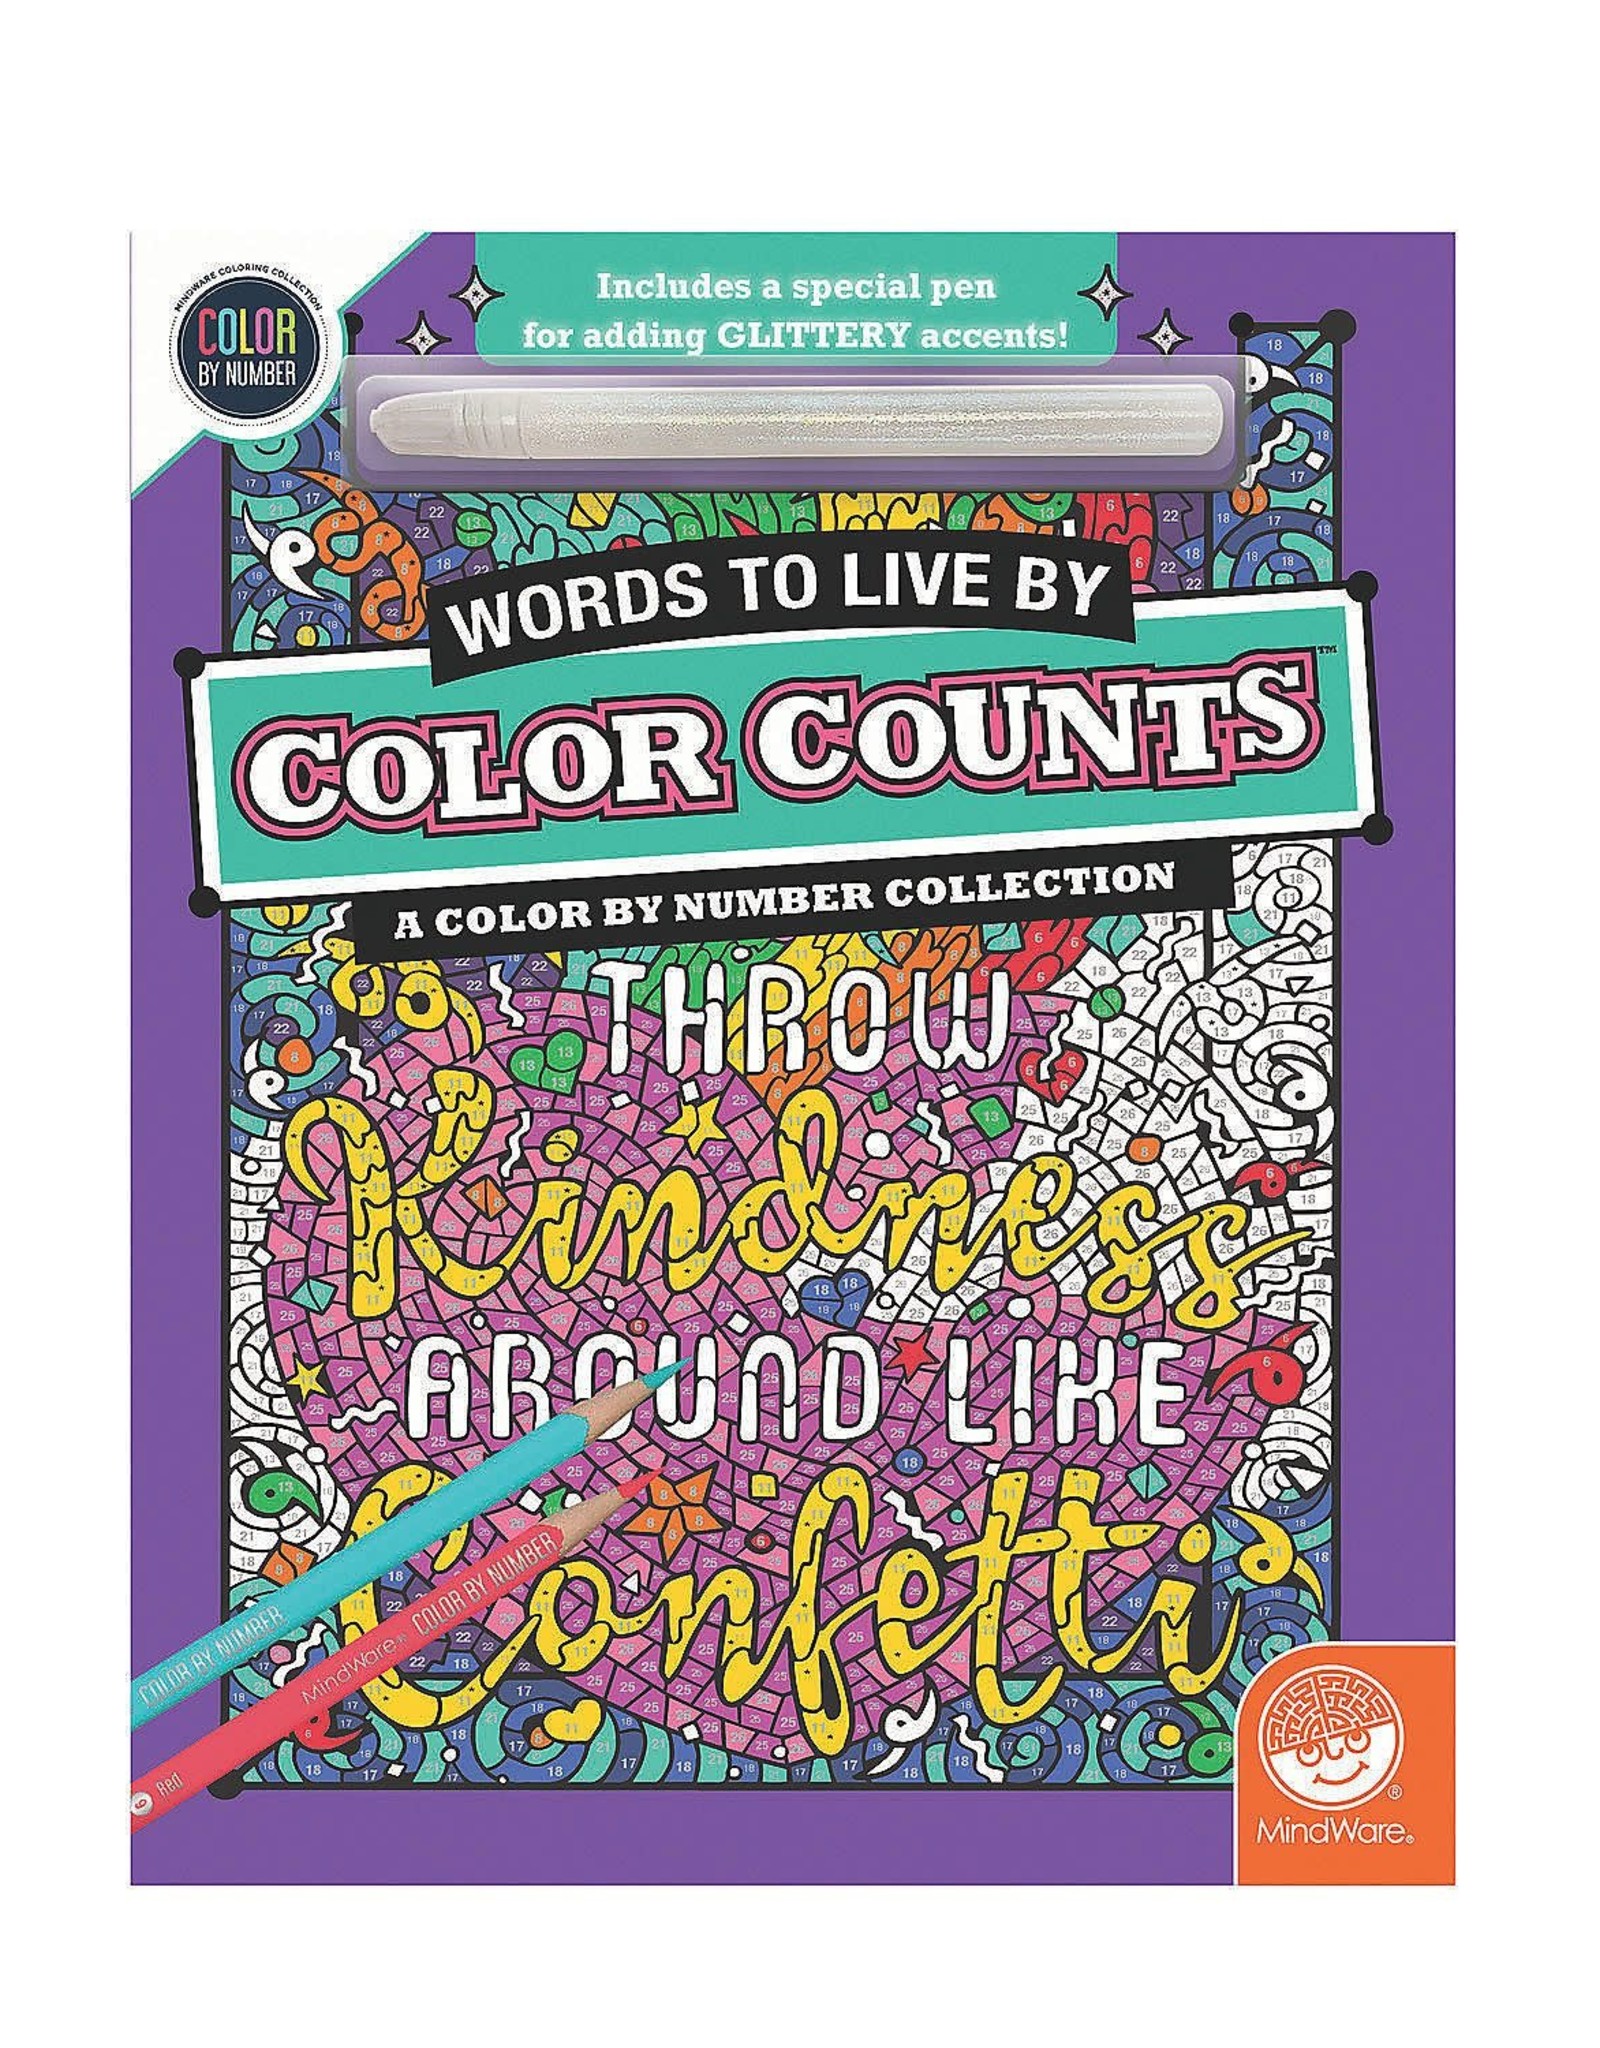 MindWare Glitter Color Counts - Words To Live By